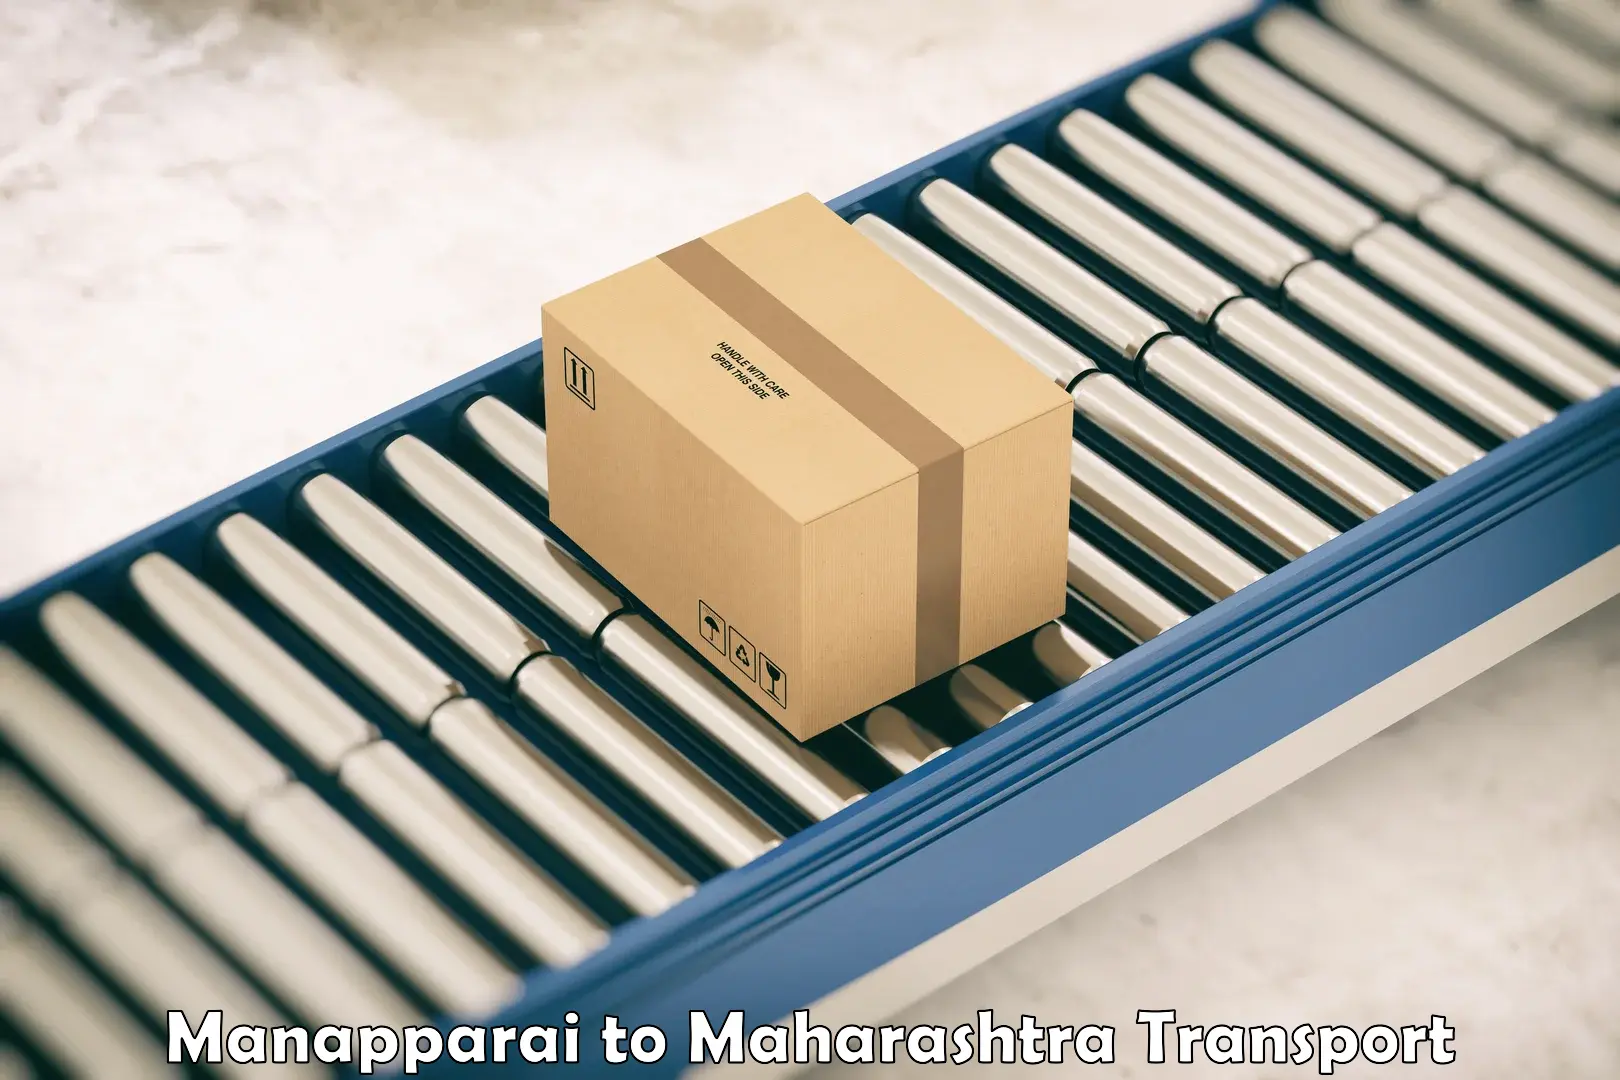 Interstate transport services in Manapparai to Mahabaleshwar